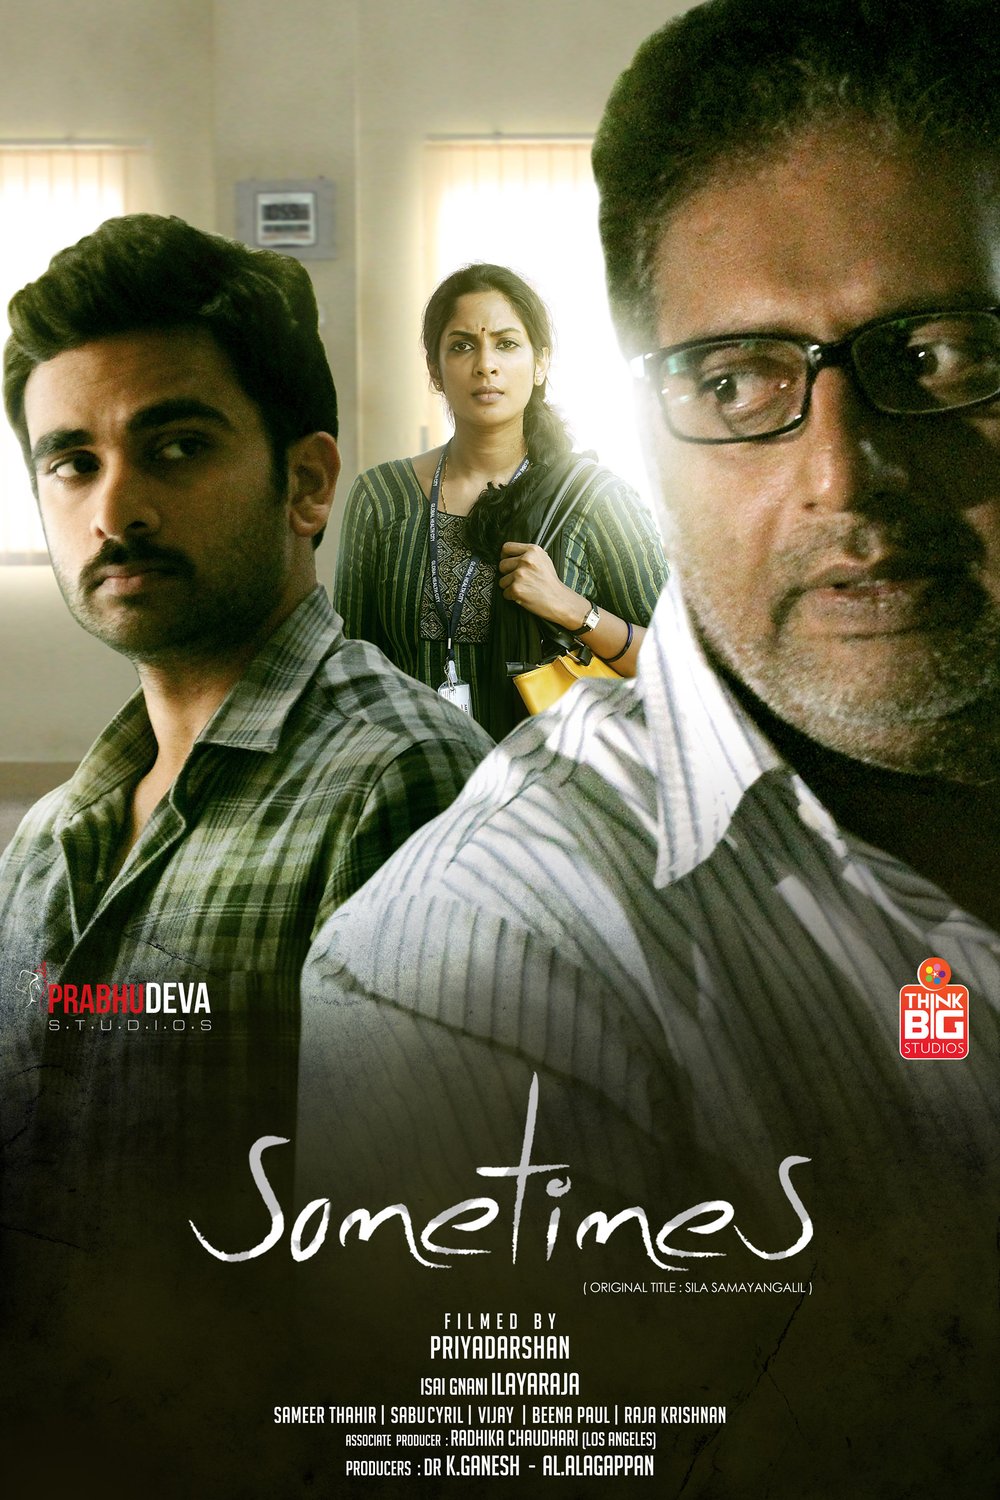 Tamil poster of the movie Sometimes